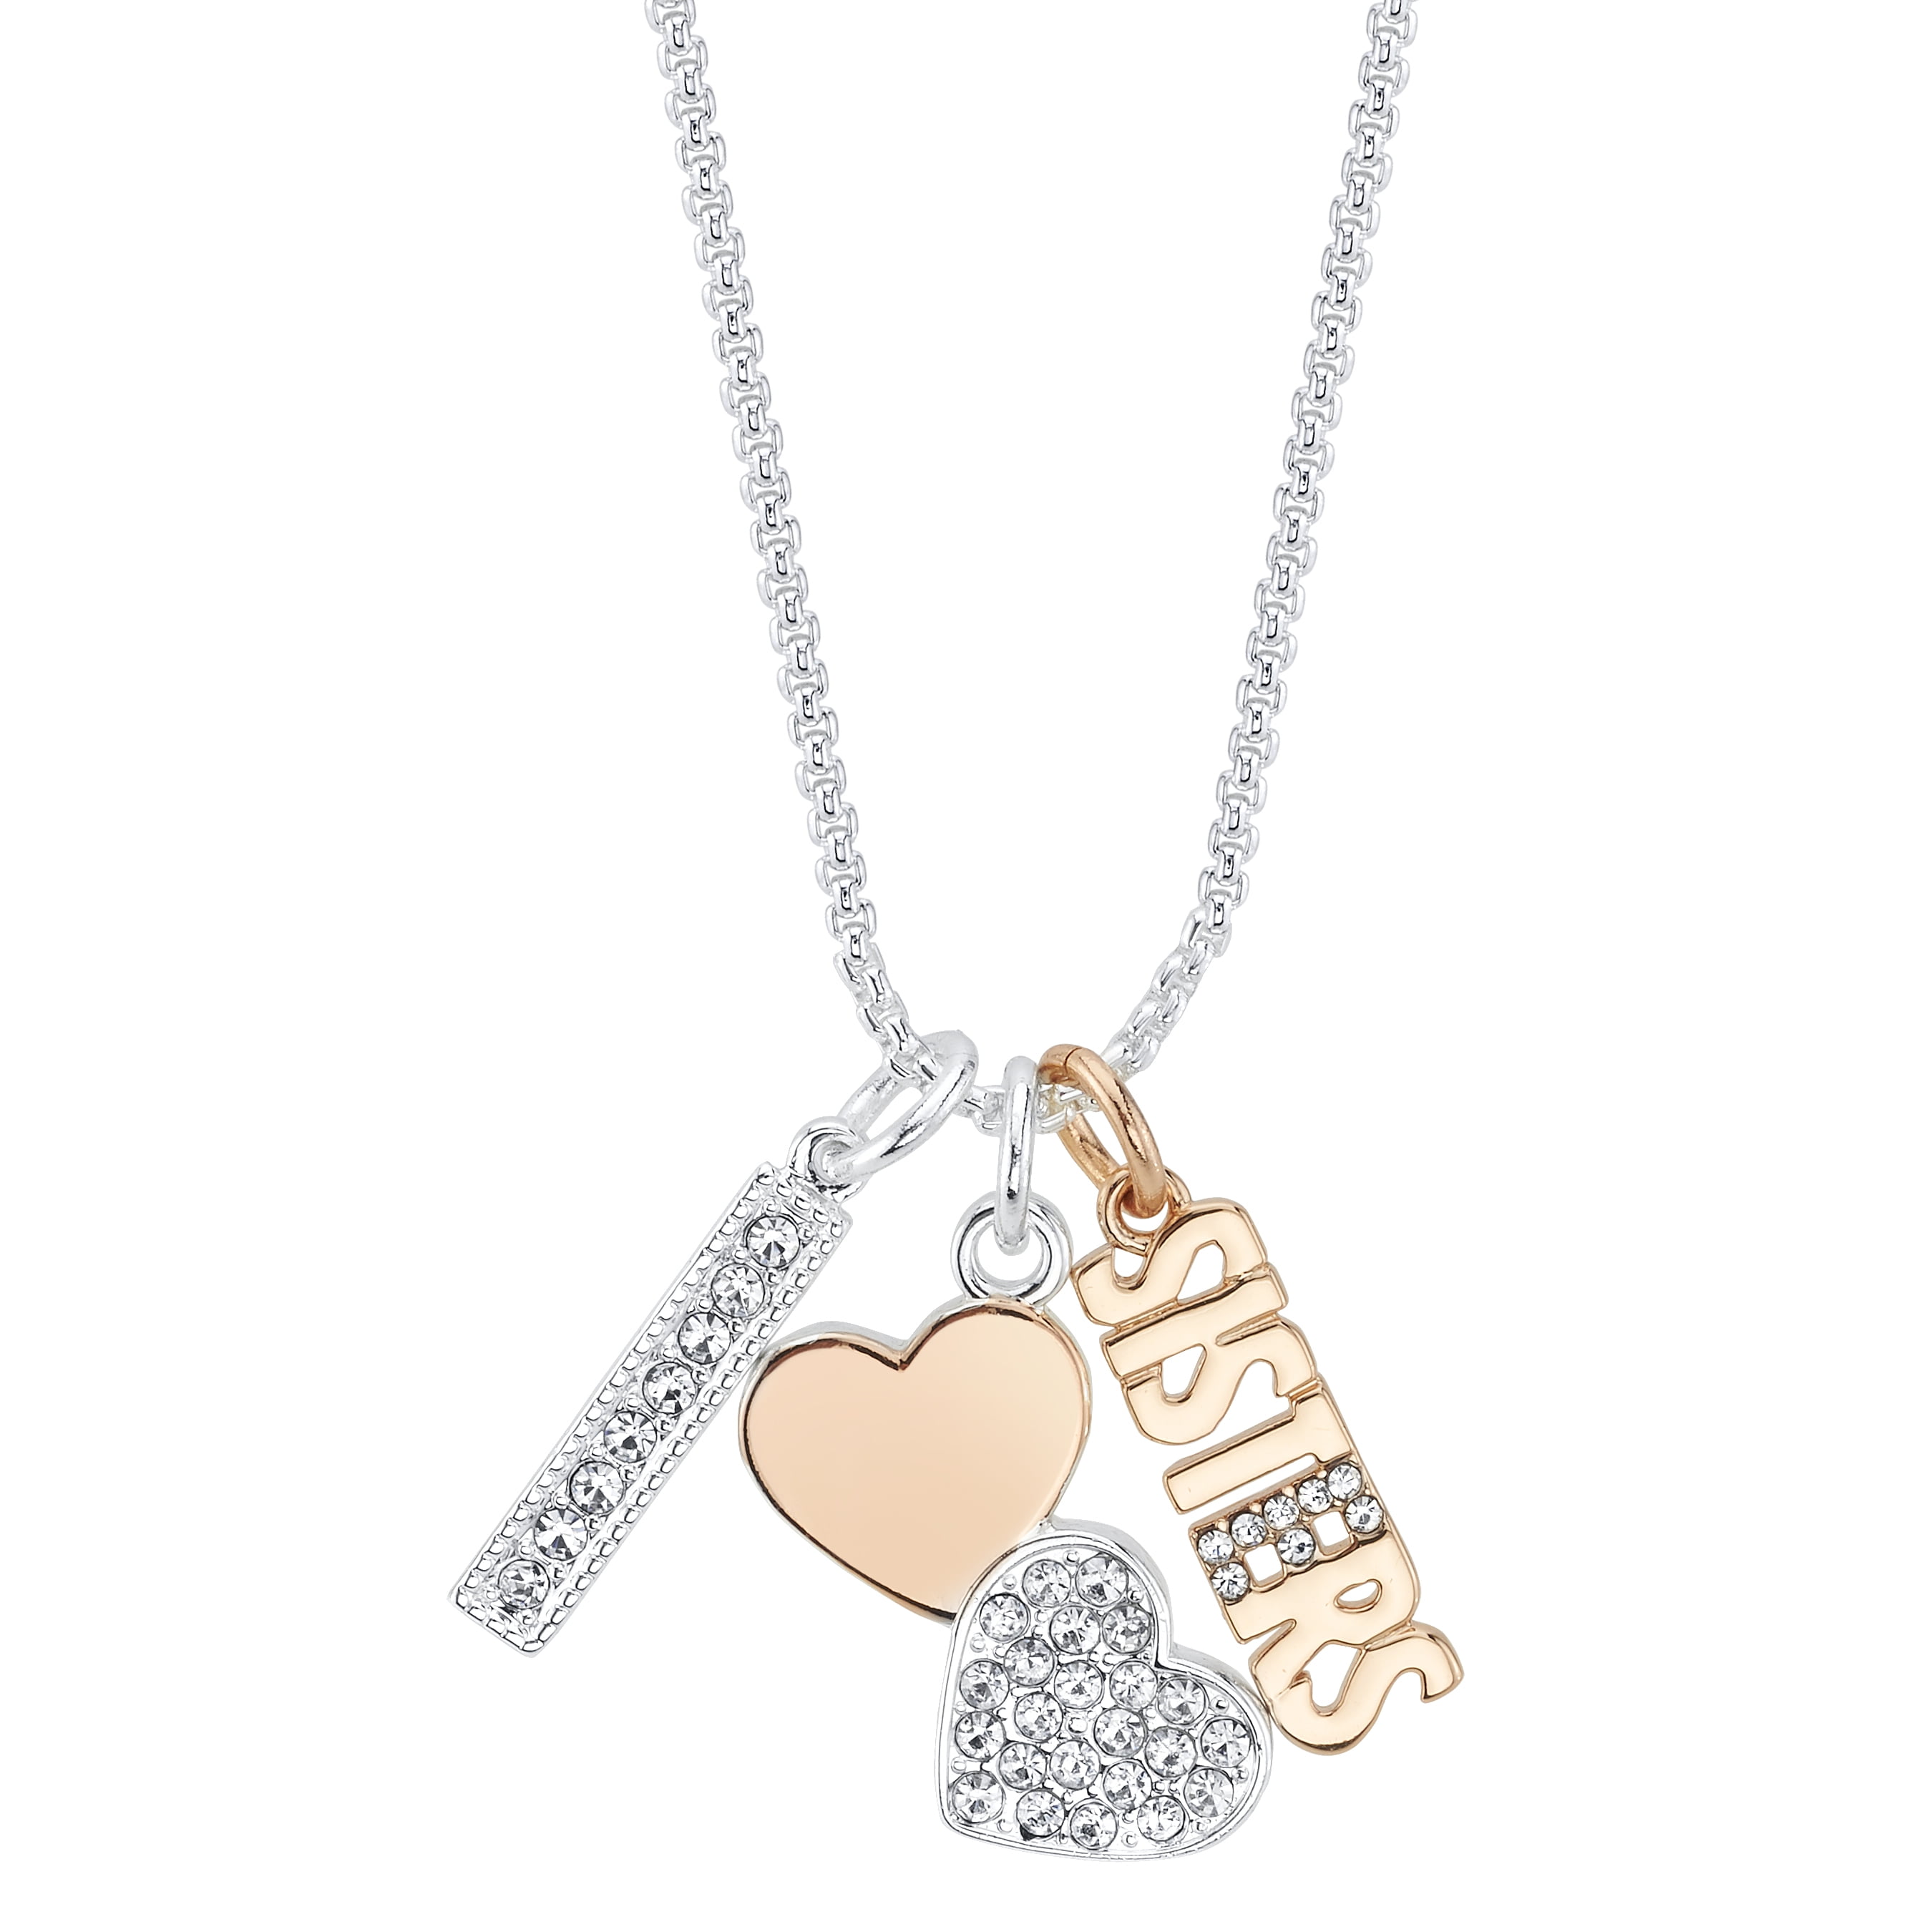 14kt Gold Flash Plated Crystal "Sisters" Double Heart Pendant Necklace, 18" + 2" Extender